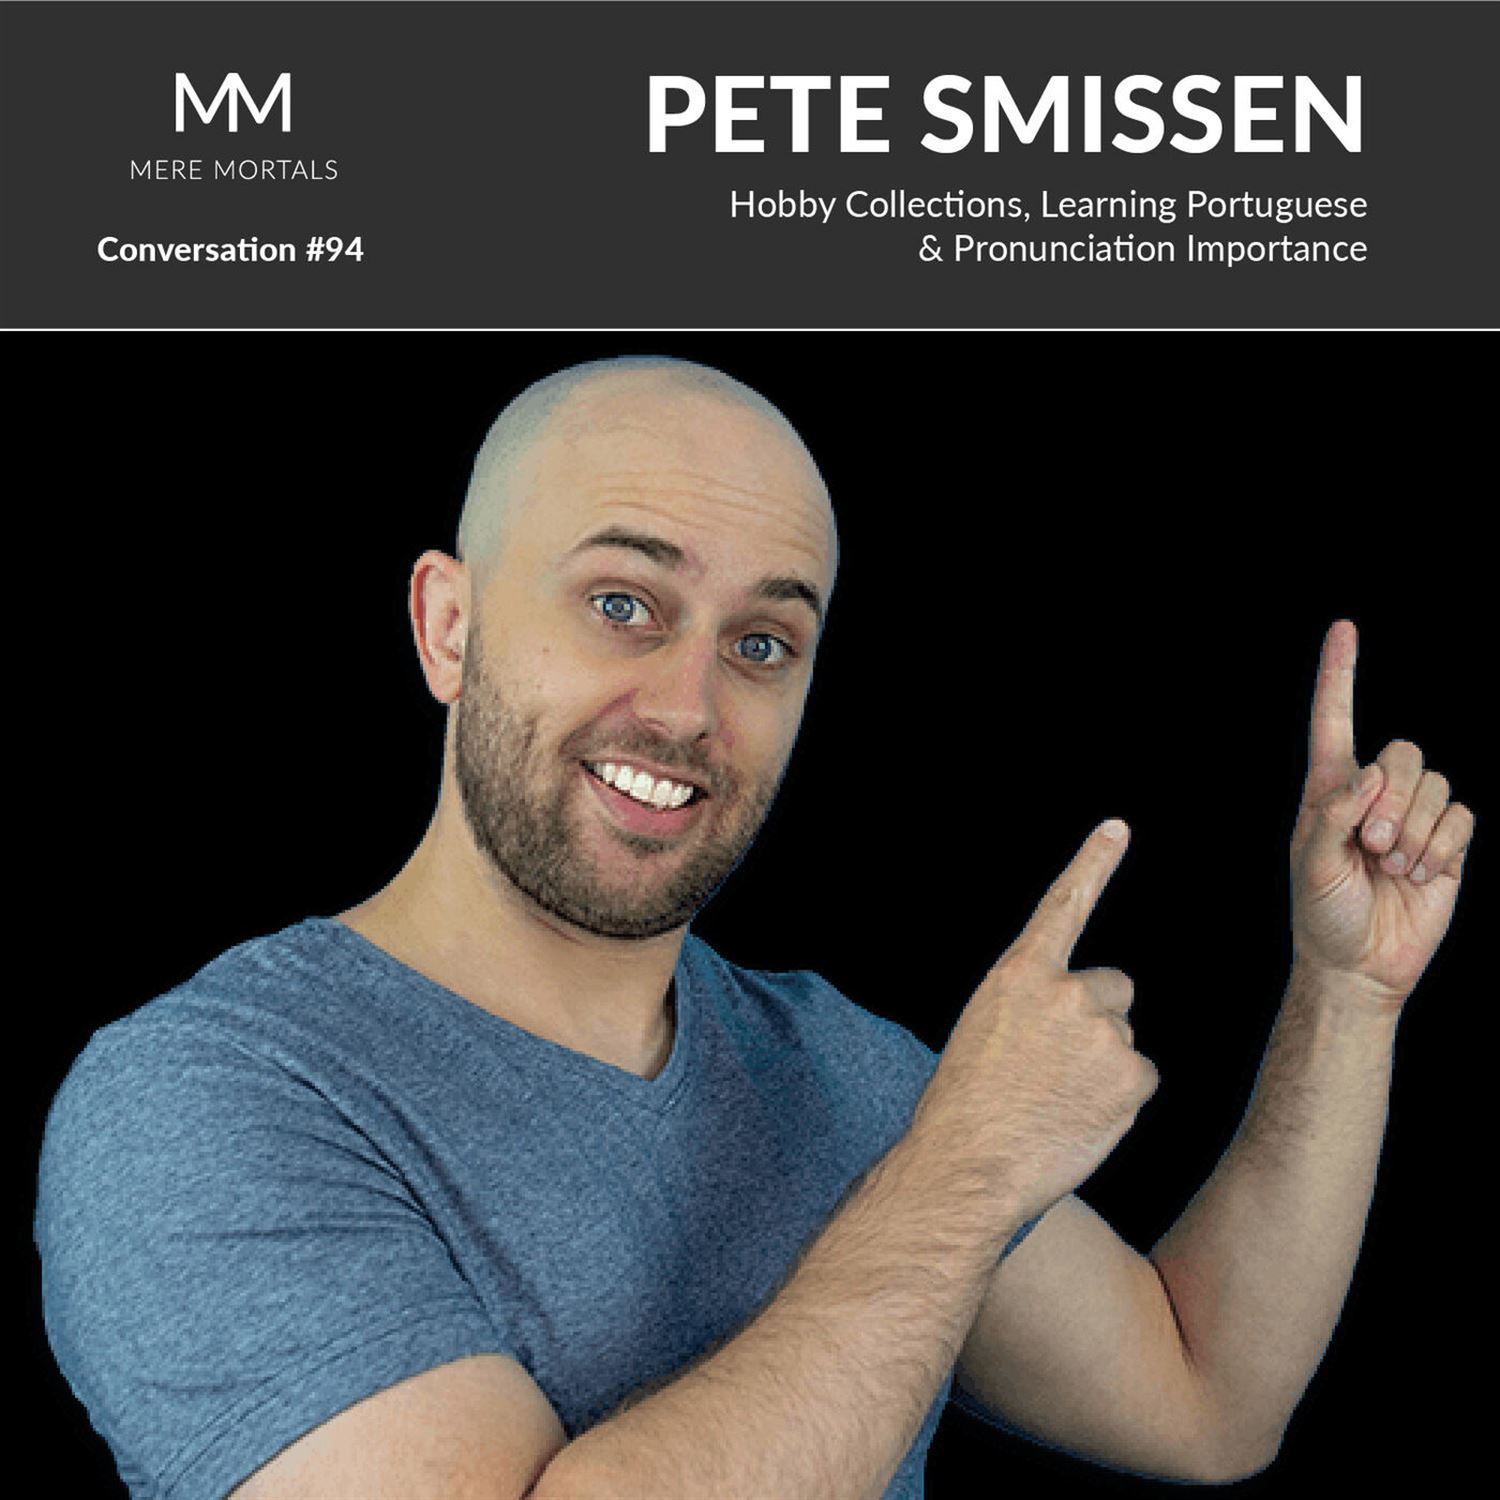 PETE SMISSEN | Hobby Collections, Learning Portuguese & Pronunciation Importance